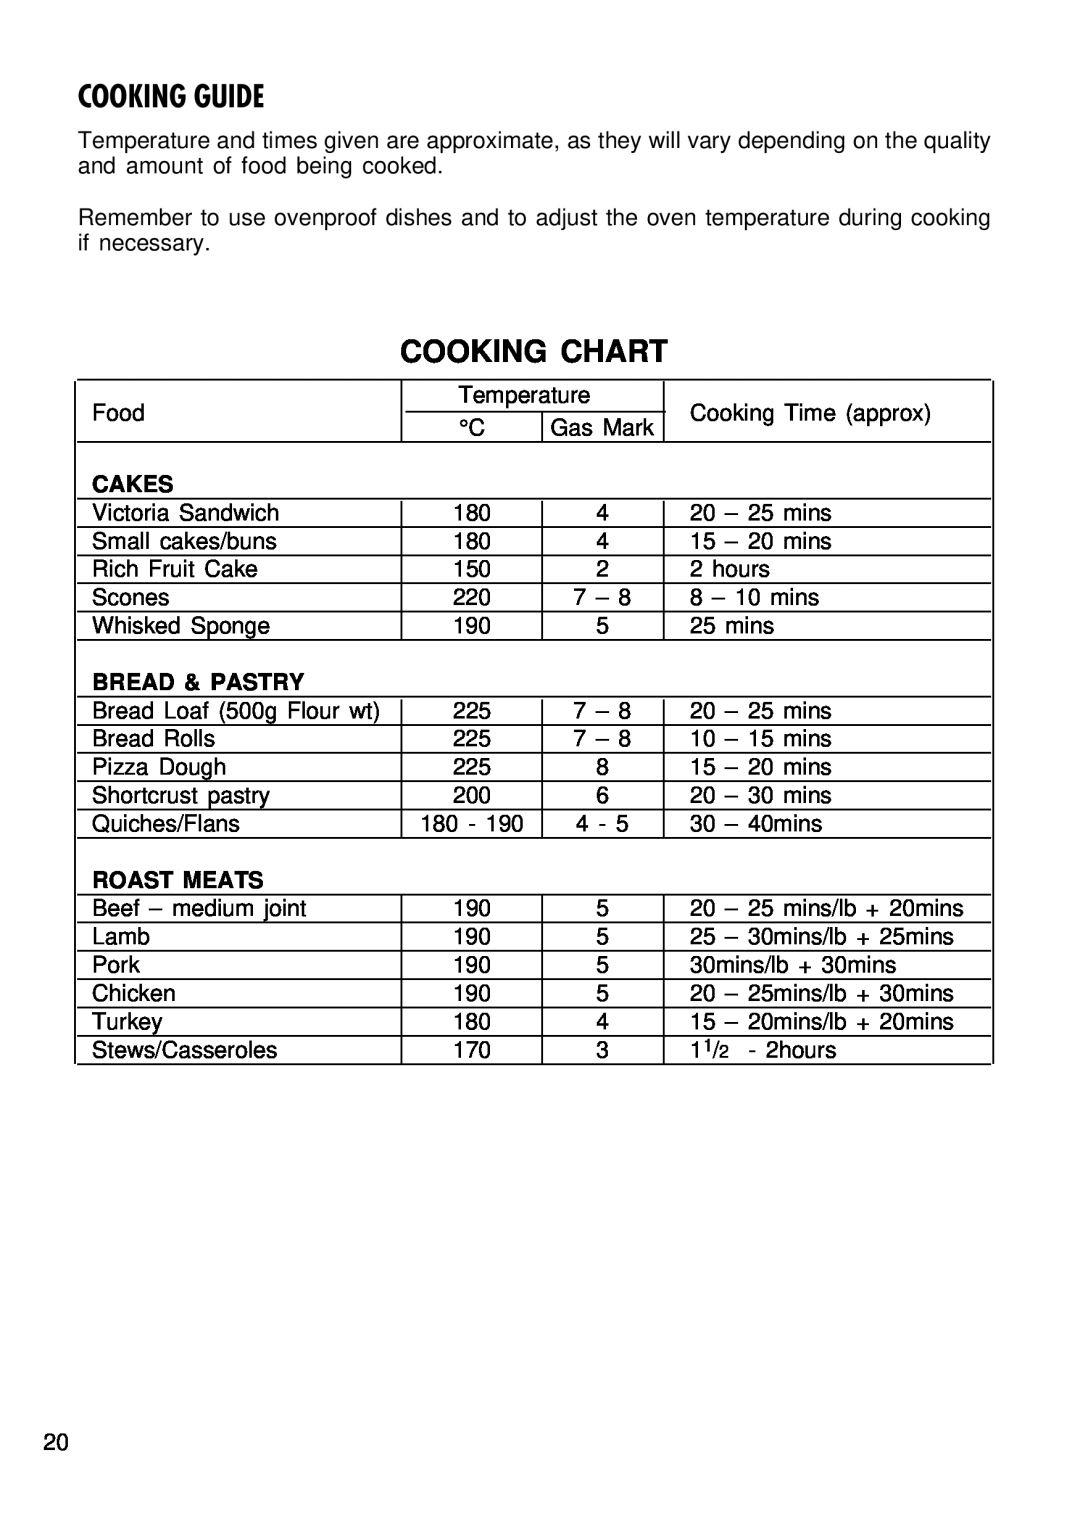 Kenwood CK 740 manual Cooking Guide, Cooking Chart, Cakes, Bread & Pastry, Roast Meats 